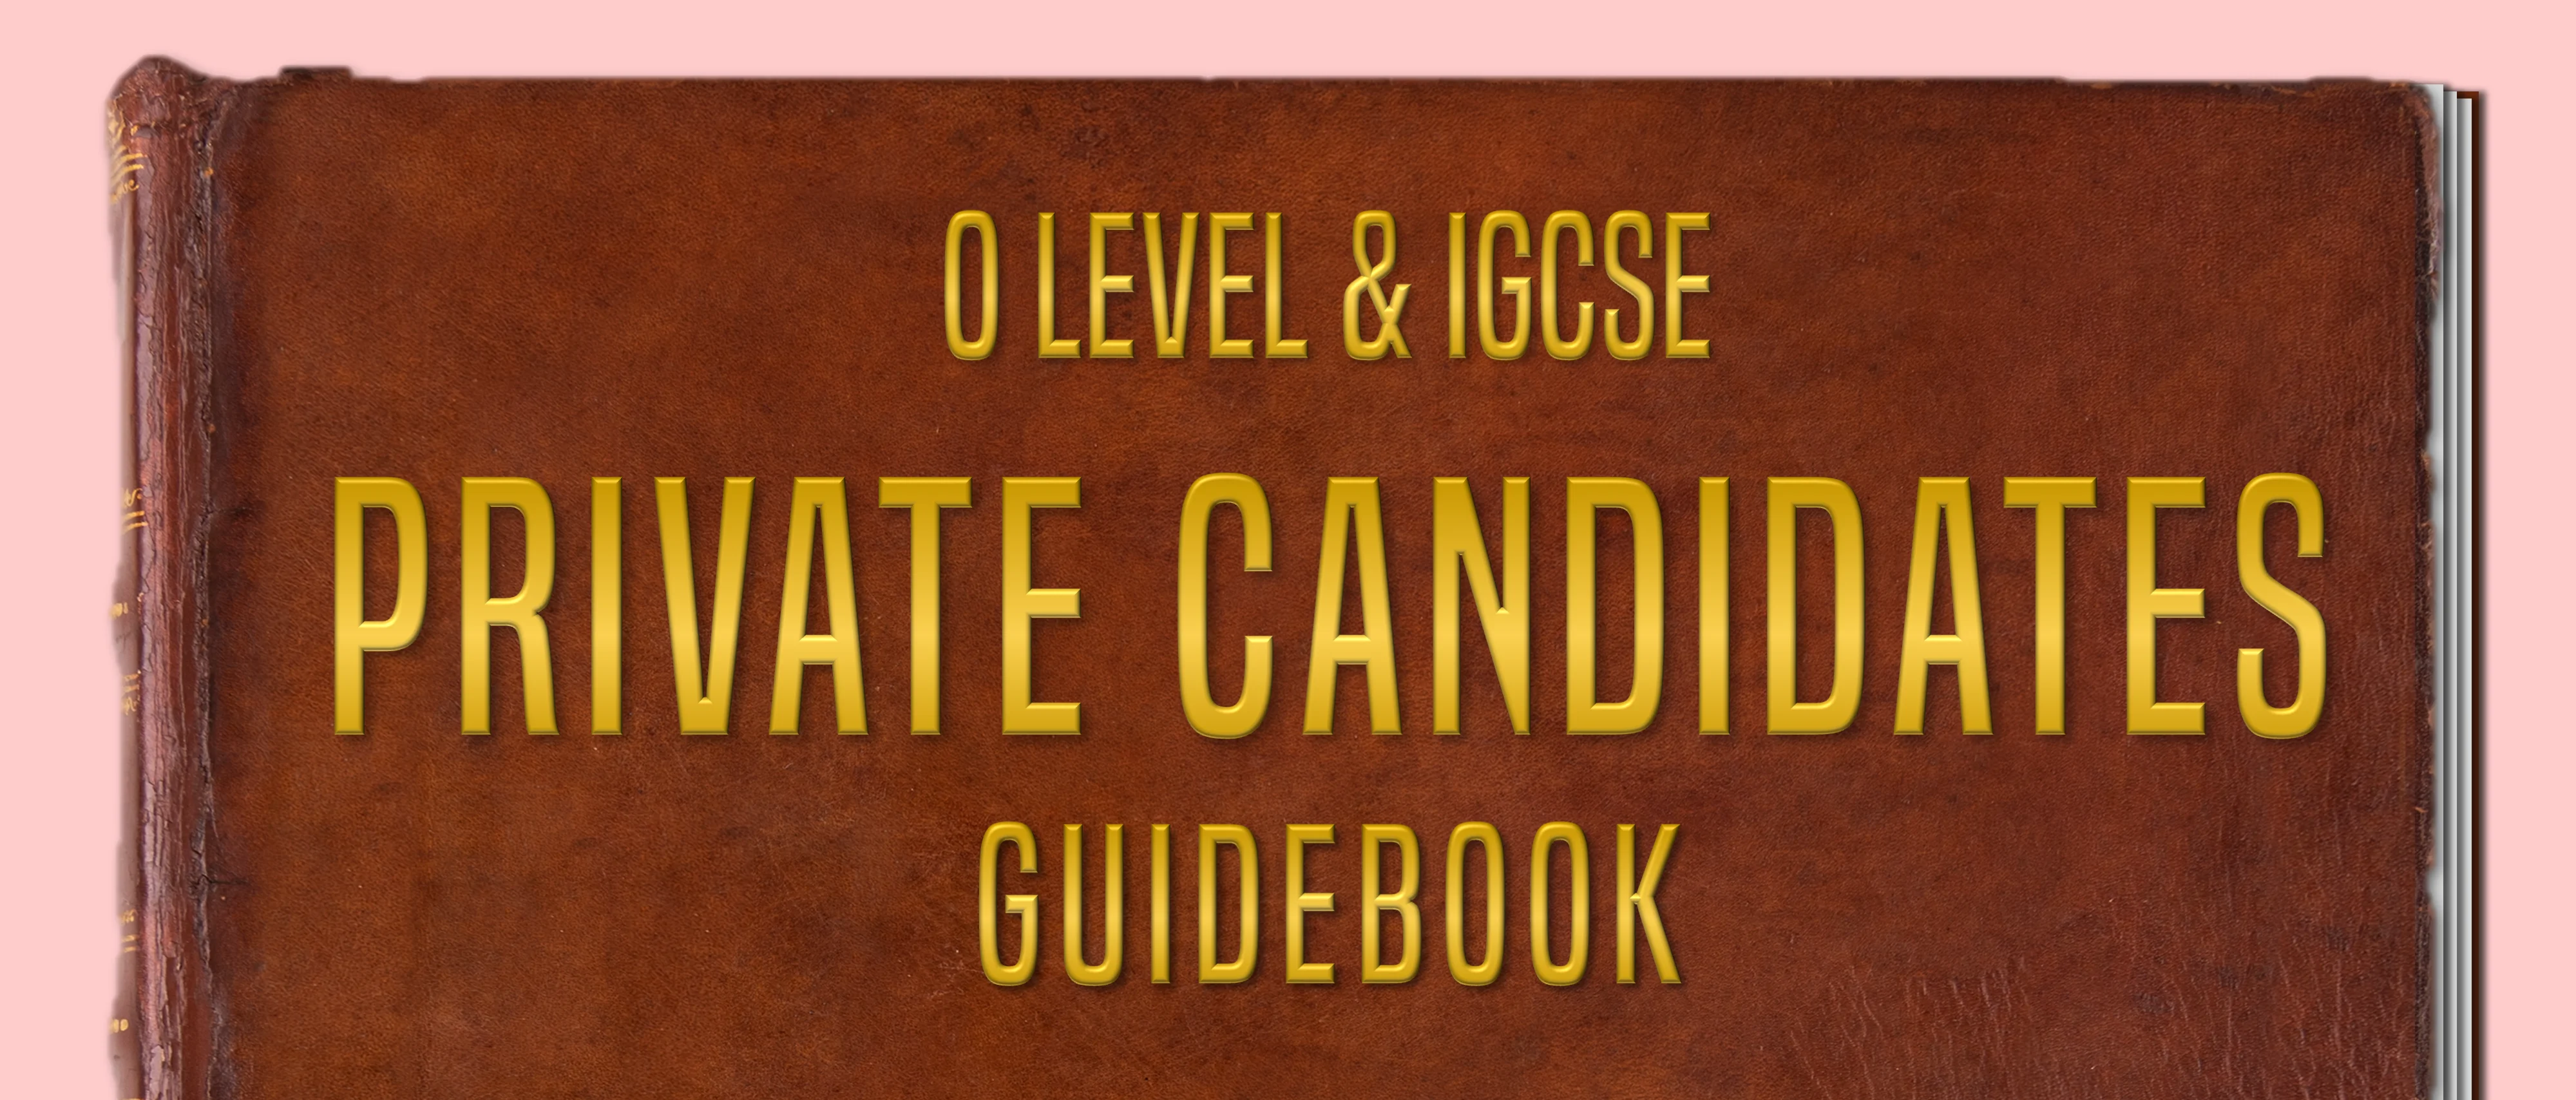 Cambridge IGCSE & AS/A Level for Private Candidates - SSTC